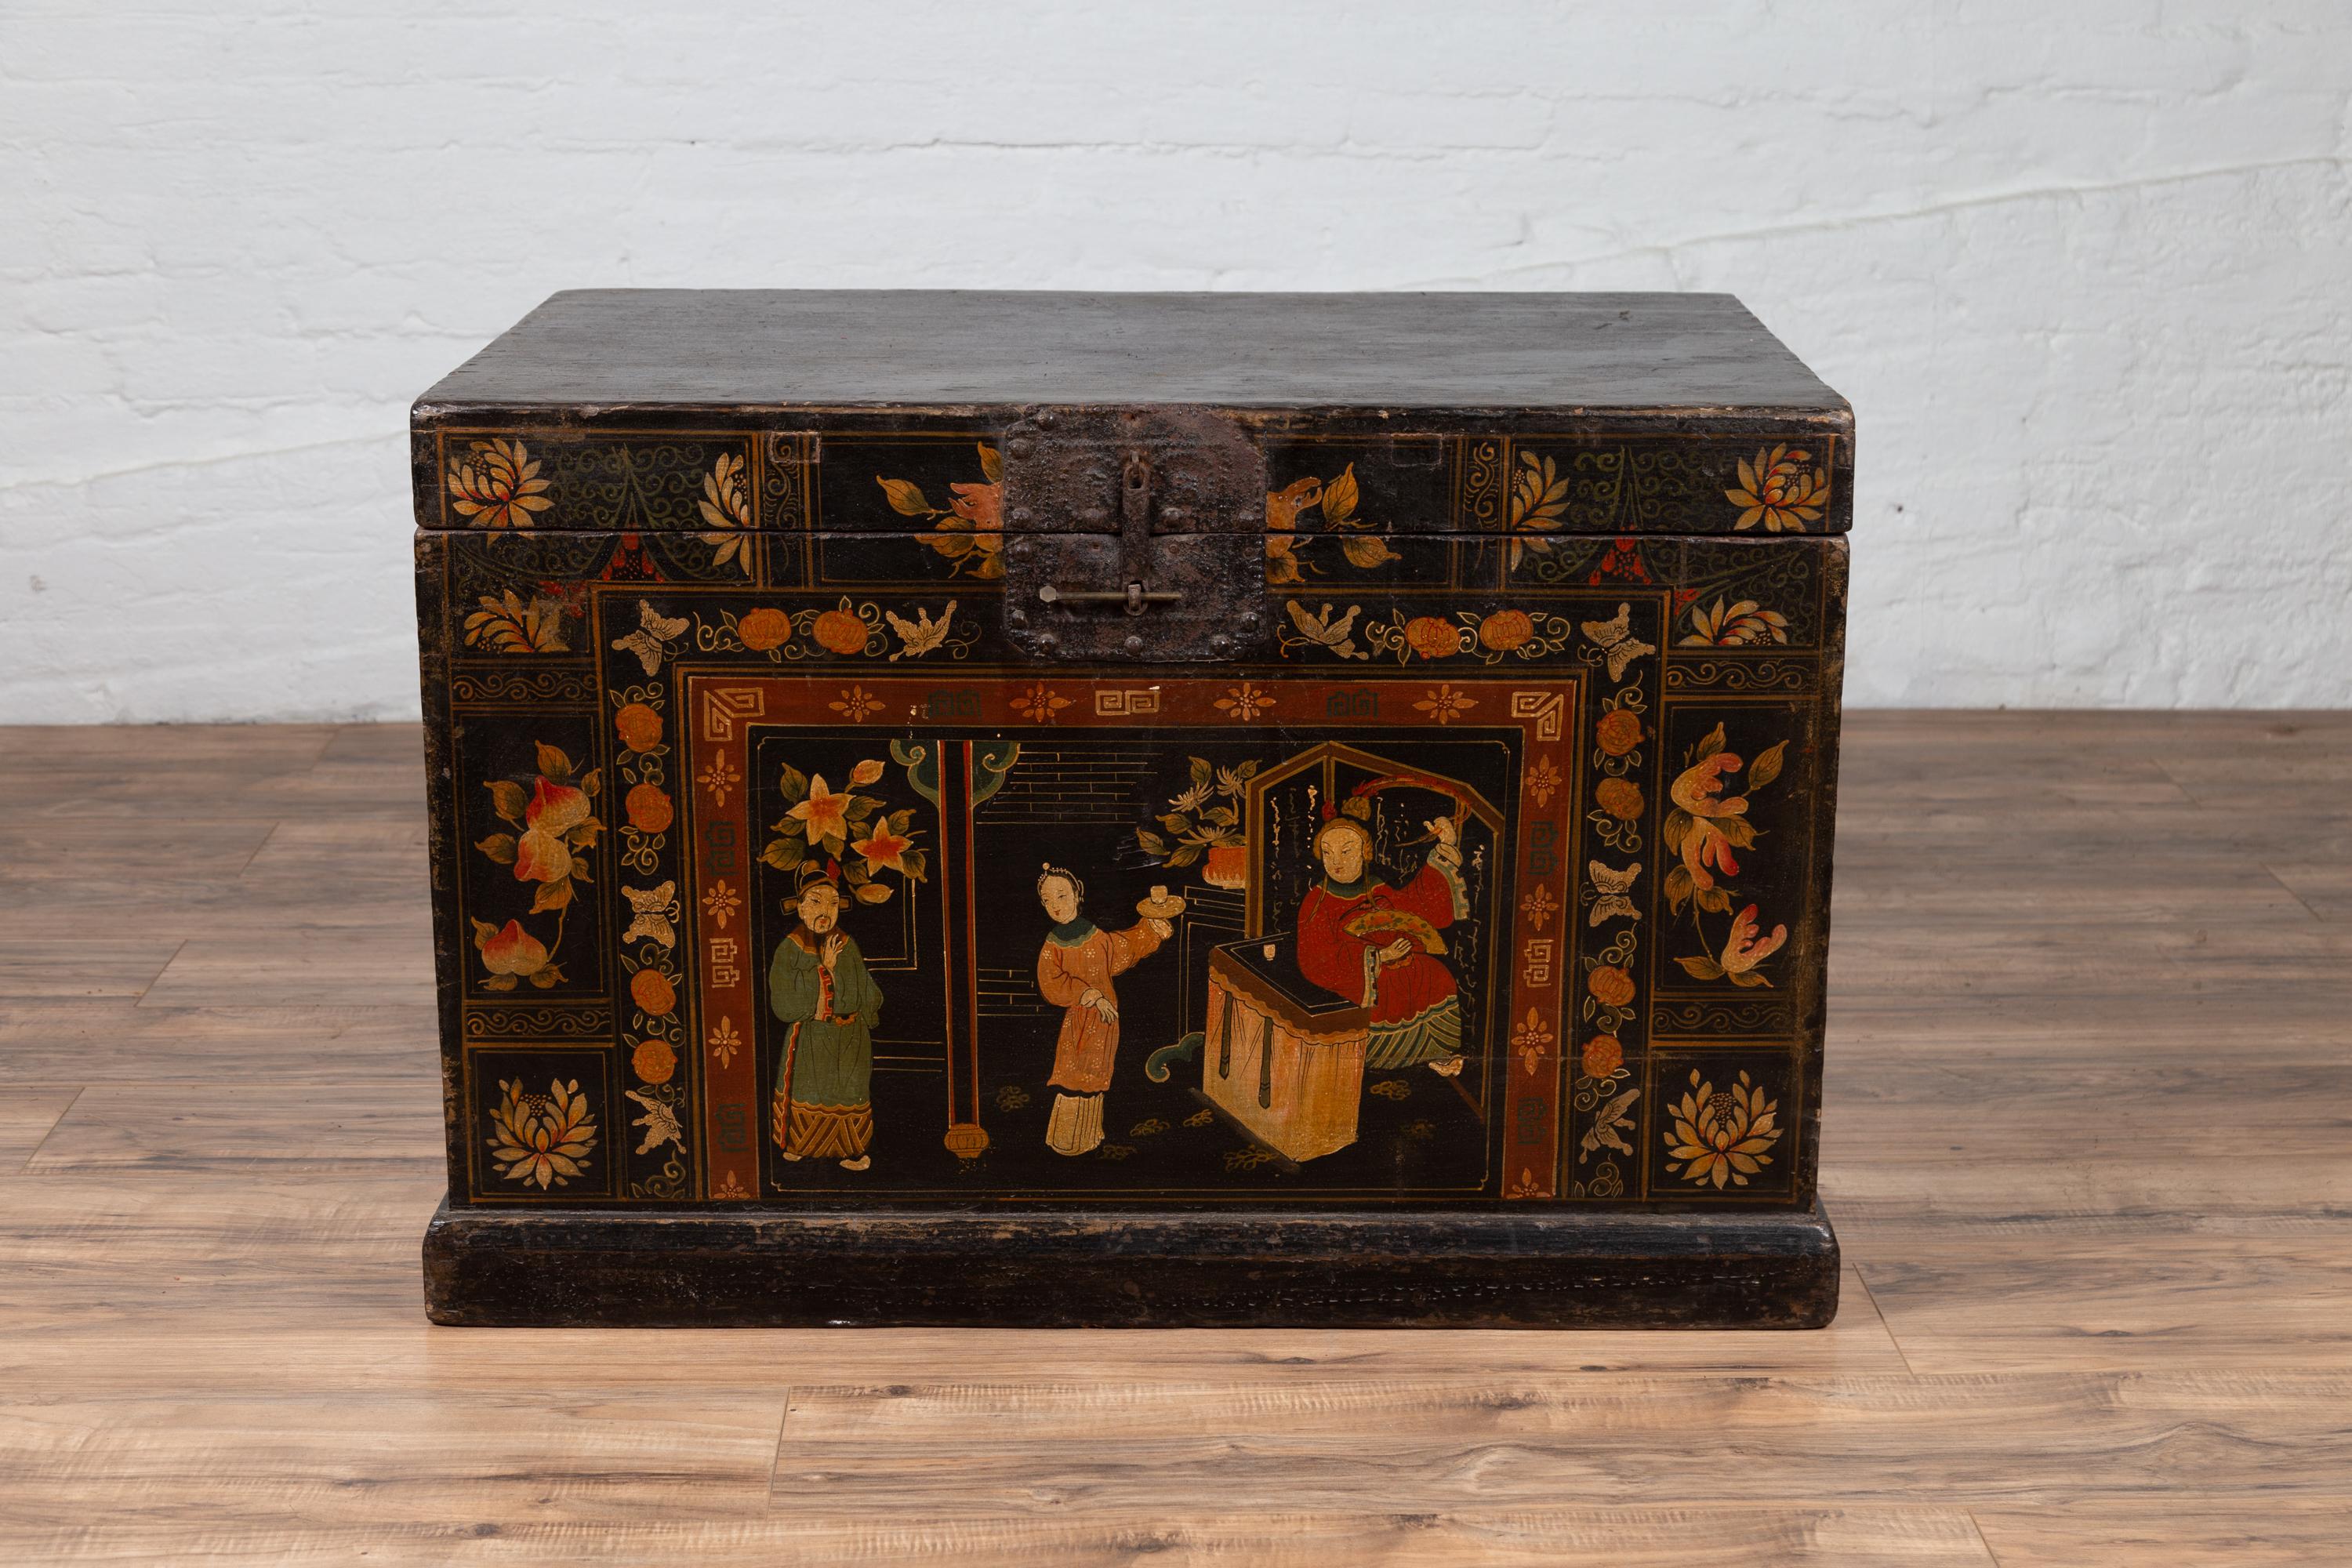 An antique Chinese large decorated black lacquered trunk from the early 20th century, with chinoiserie decor. Born in China during the early years of the 20th century, this trunk features an exquisite and colorful chinoiserie decor depicting court